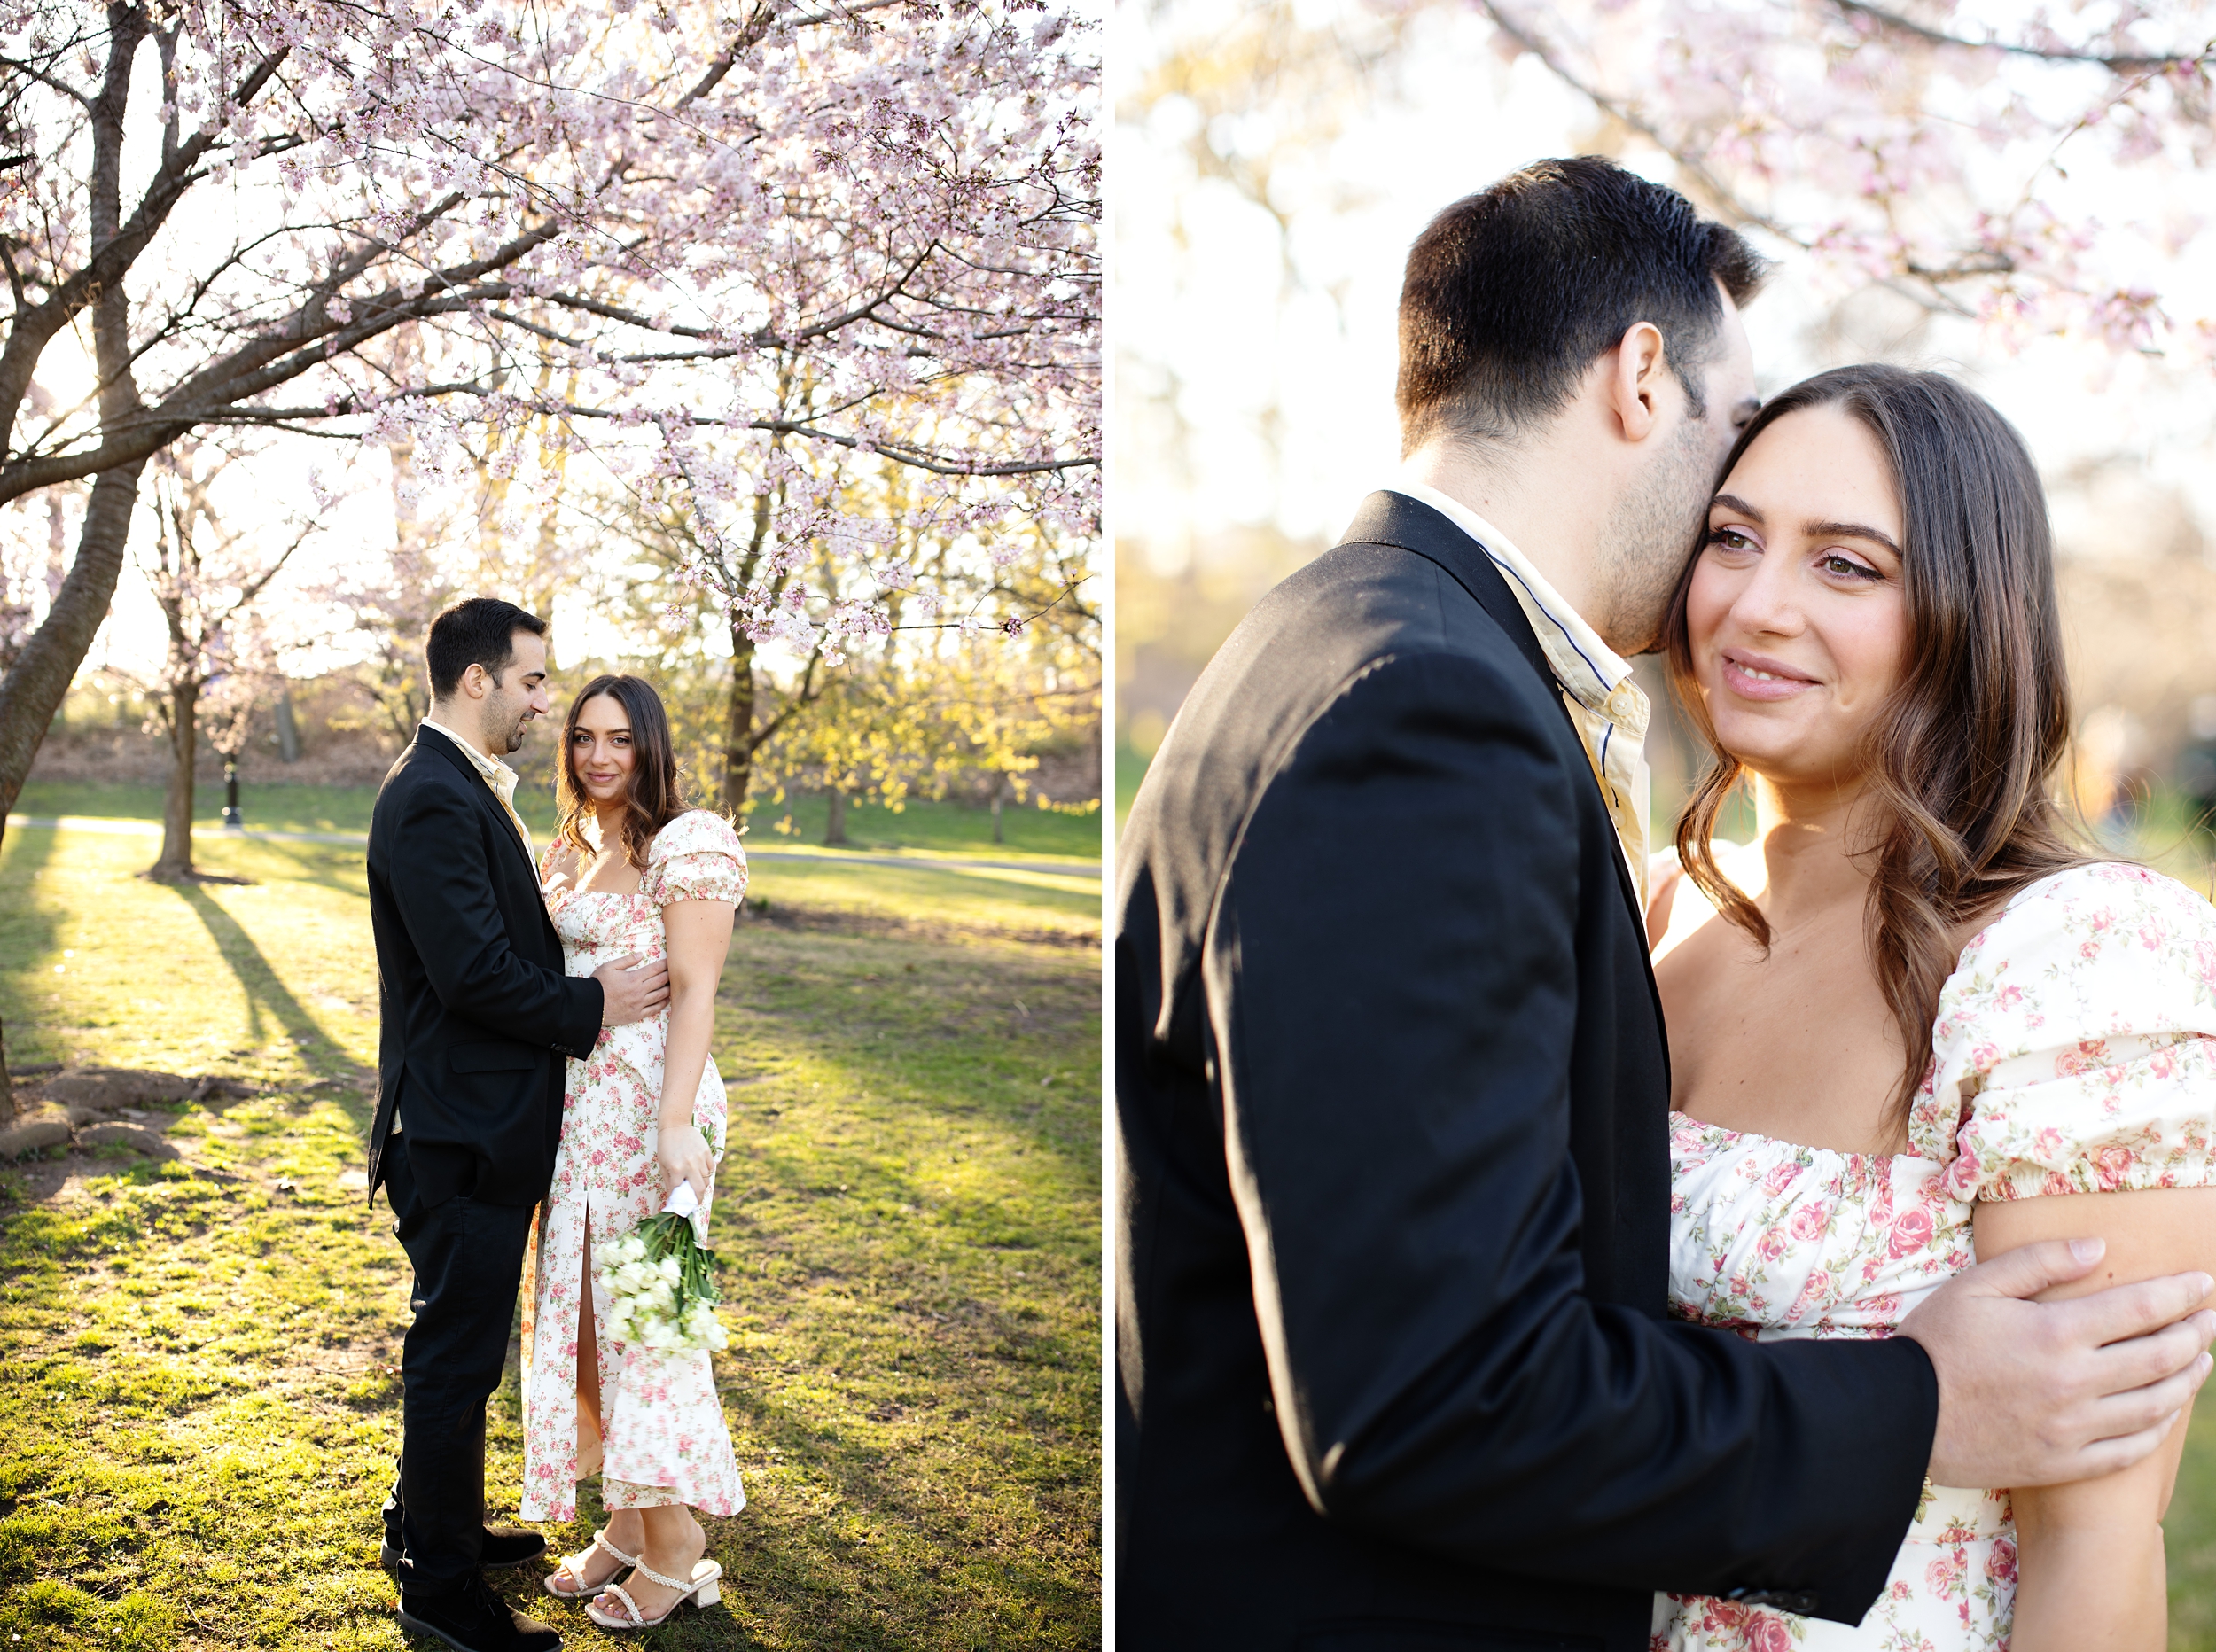 Branch Brook Park NJ Engagement Photos, Cherry Blossom Engagement Photos-New Jersey Wedding and Engagement Photographer